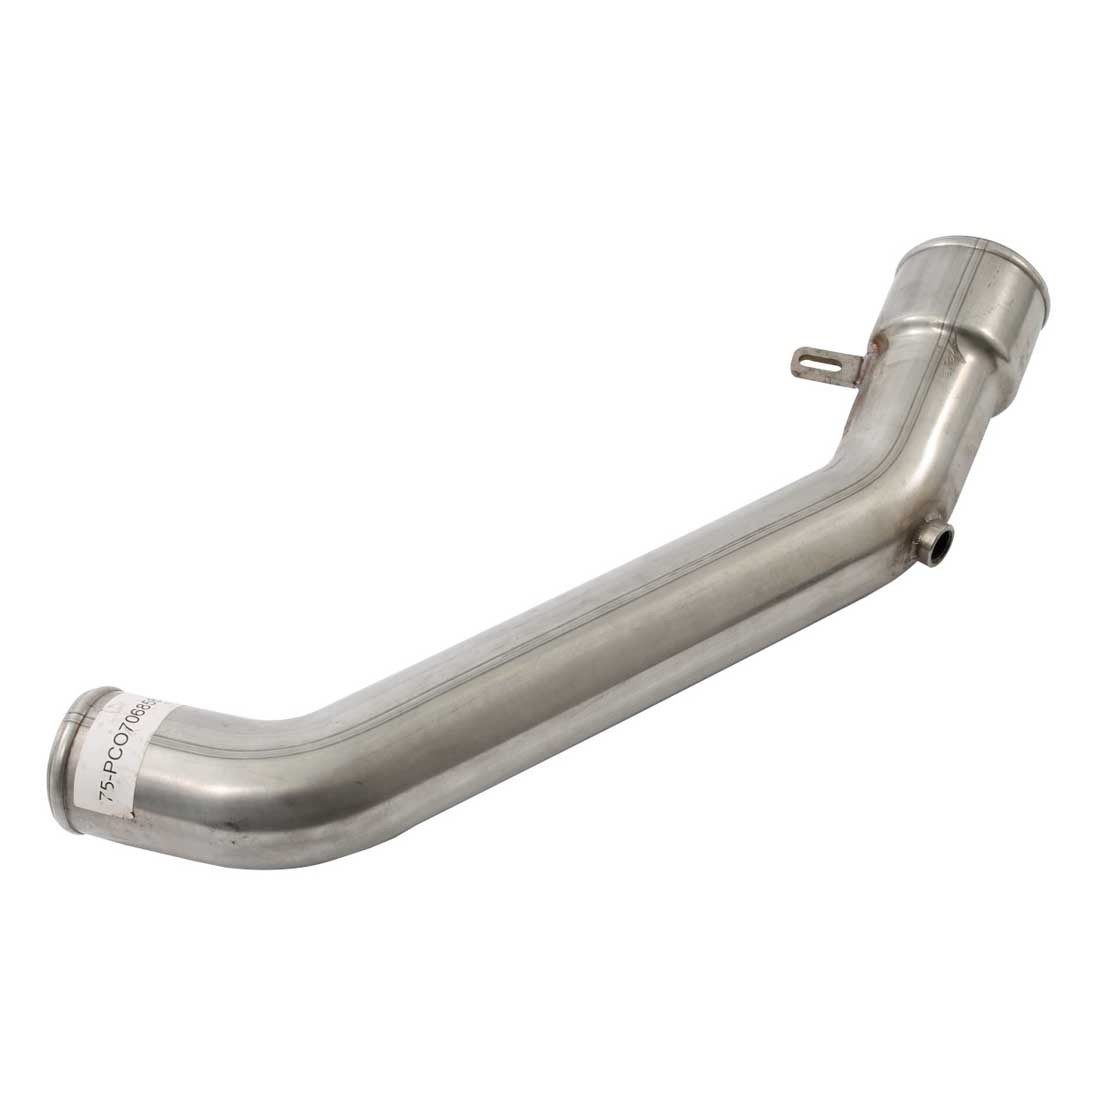 Peterbilt Cat Stainless Steel Lower Coolant Tube Top.